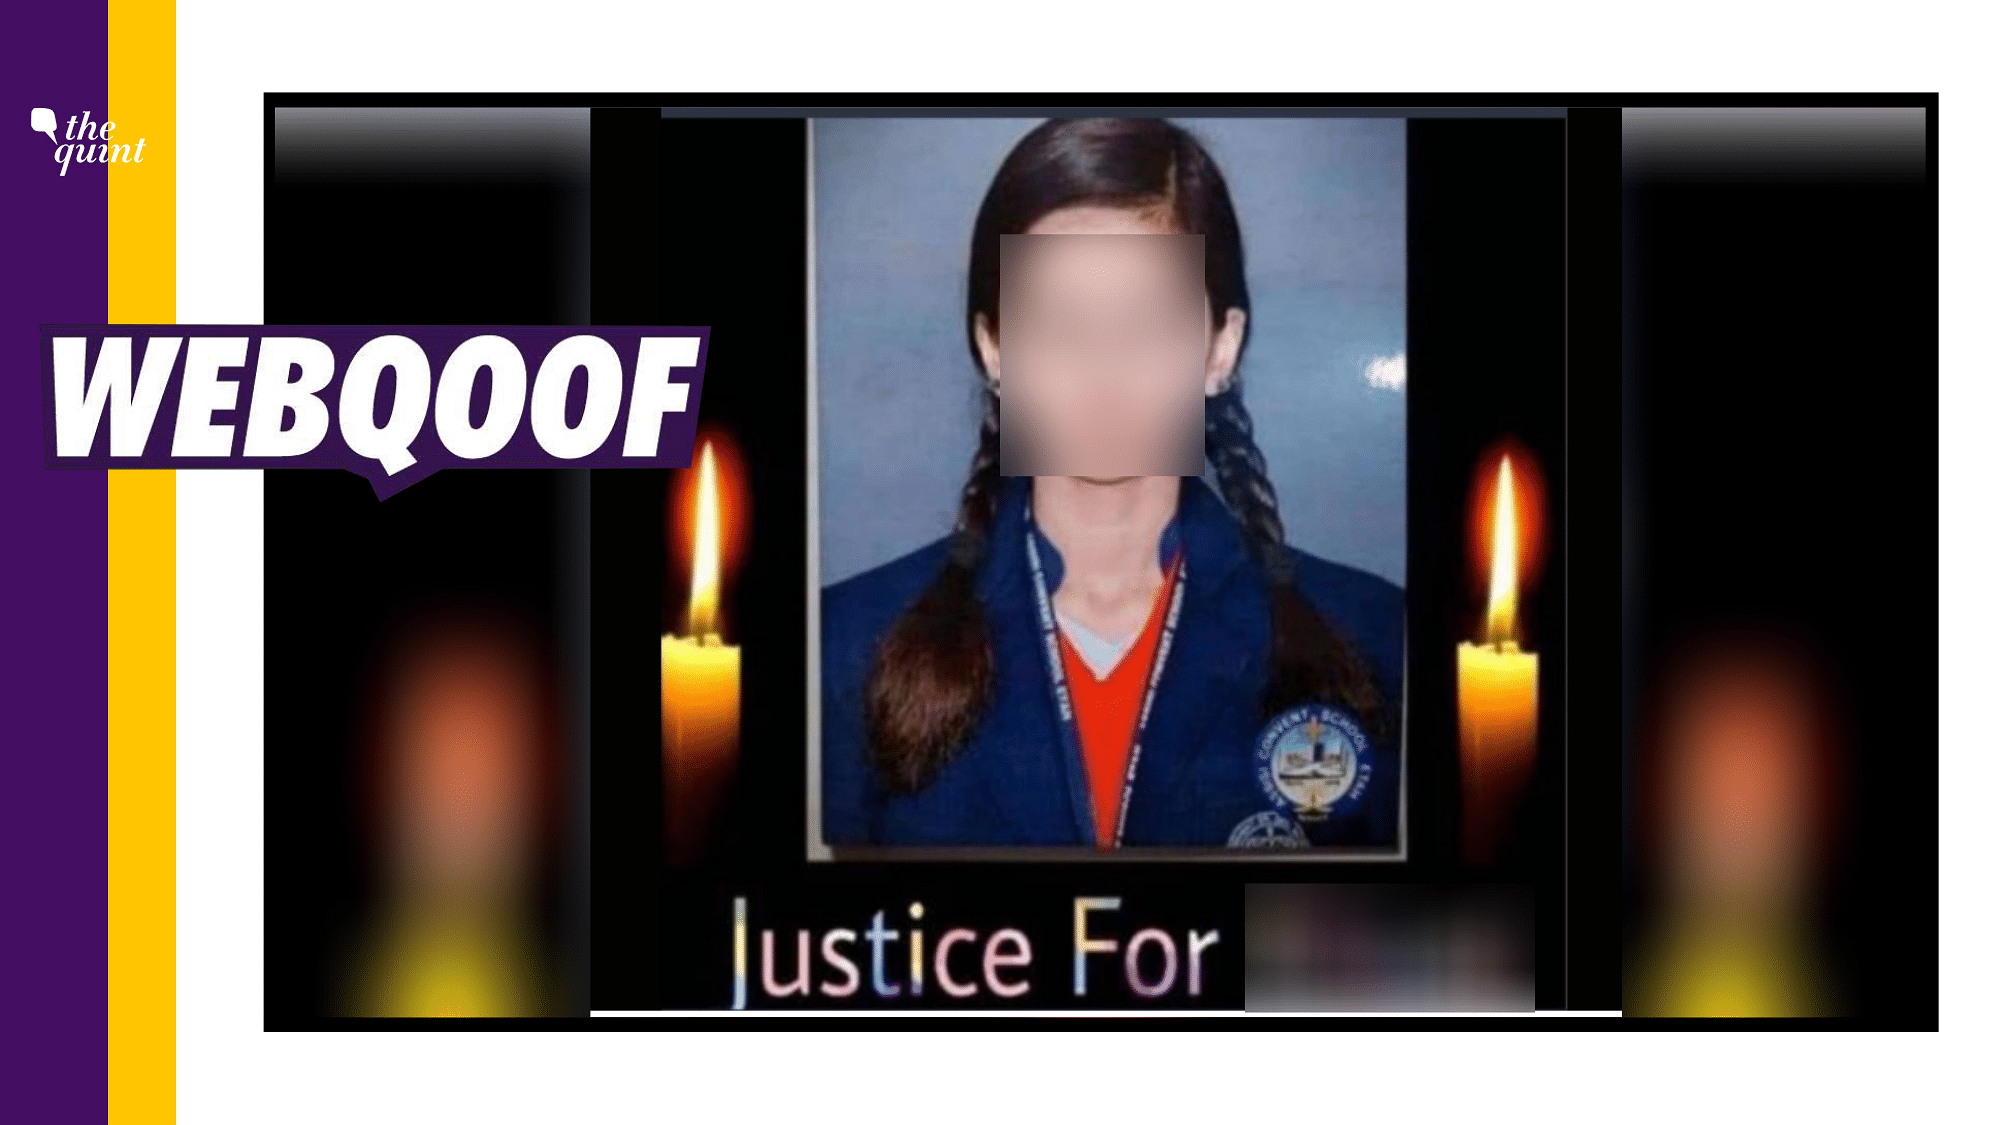 The viral image is actually from a case in Etah, Uttar Pradesh, where a 16-year-old girl reportedly died by suicide.